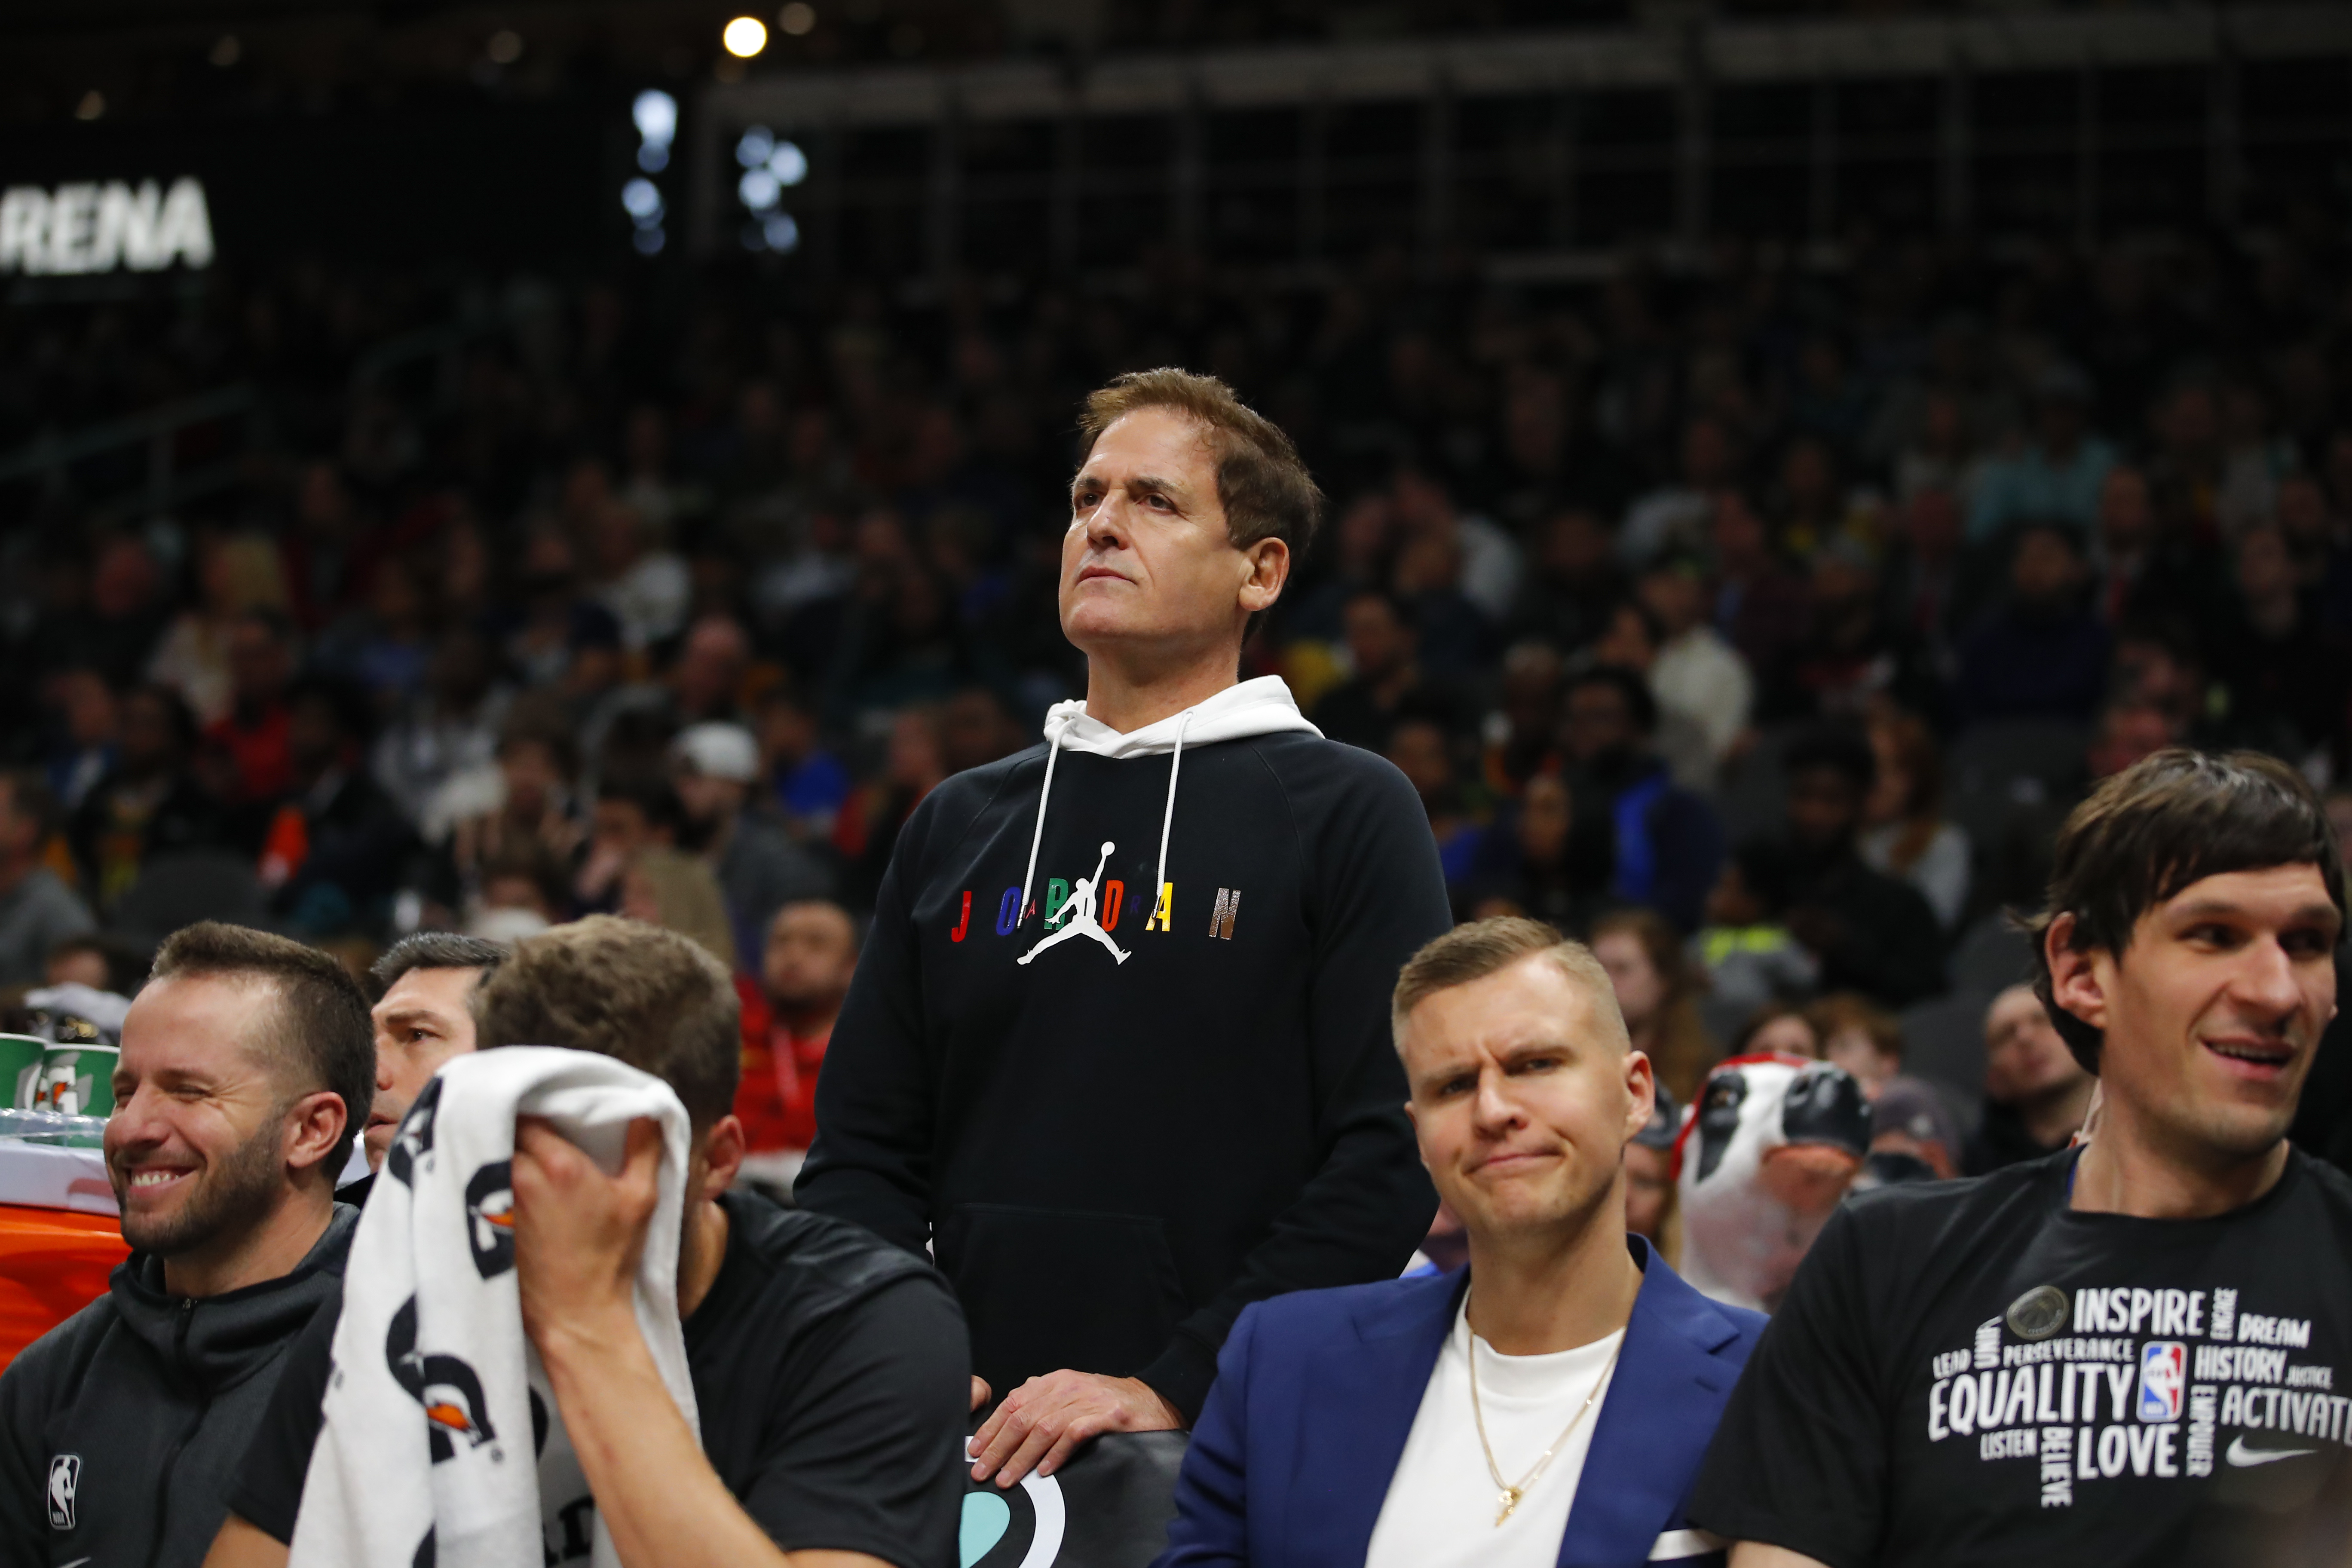 Mark Cuban Has Paid Over $3 Million in NBA Fines in His Battle Against NBA Officiating